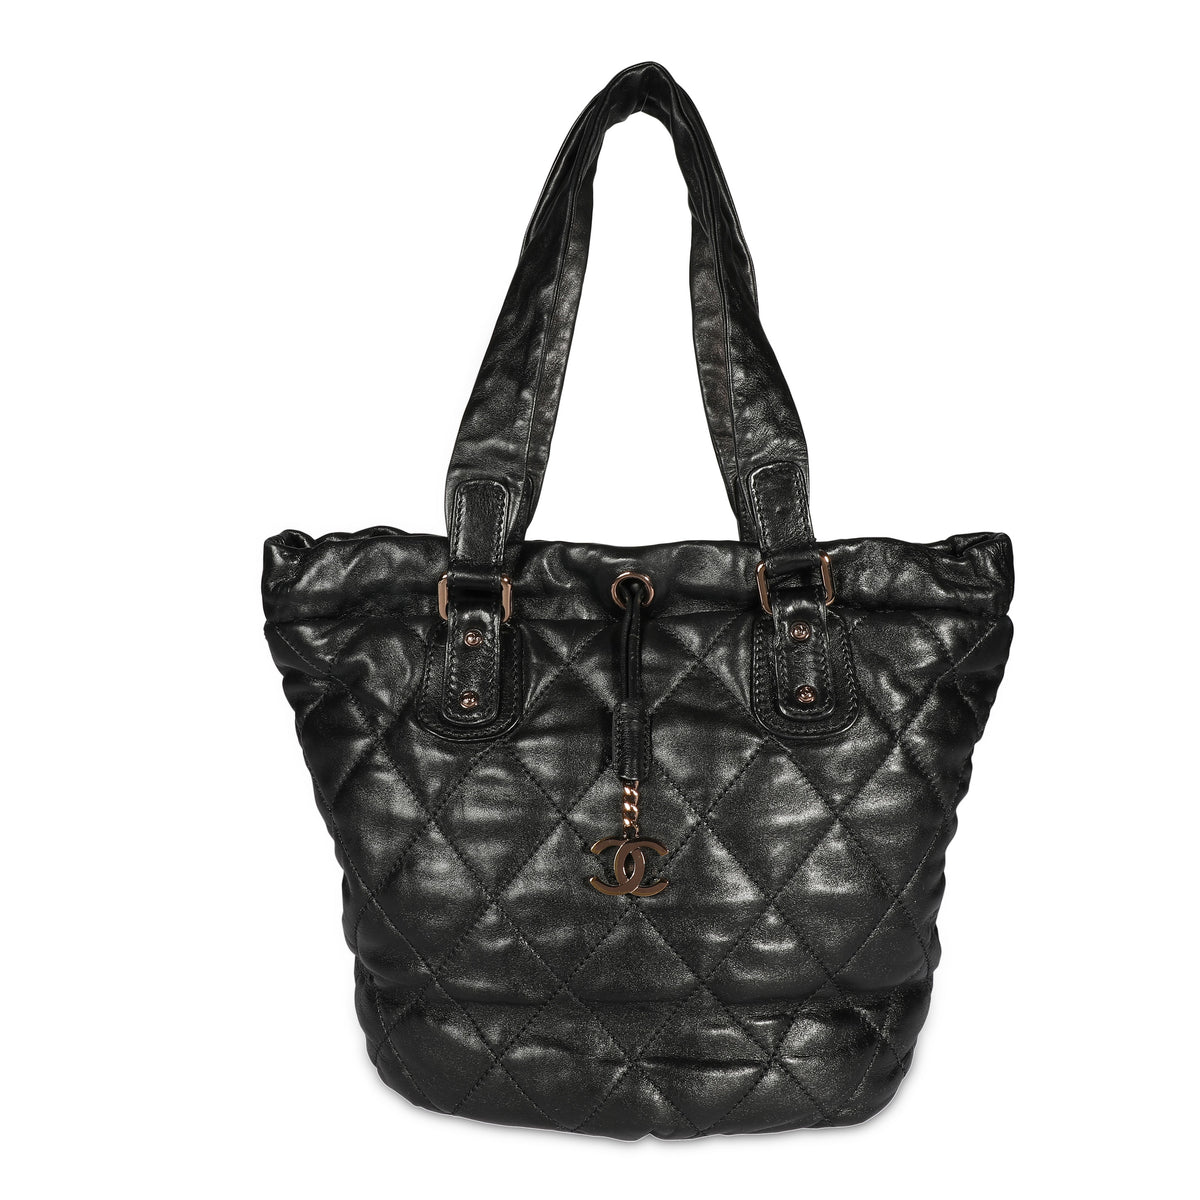 CHANEL Gorgeous Cambon Tote bag in brown quilted lambskin leather, SHW